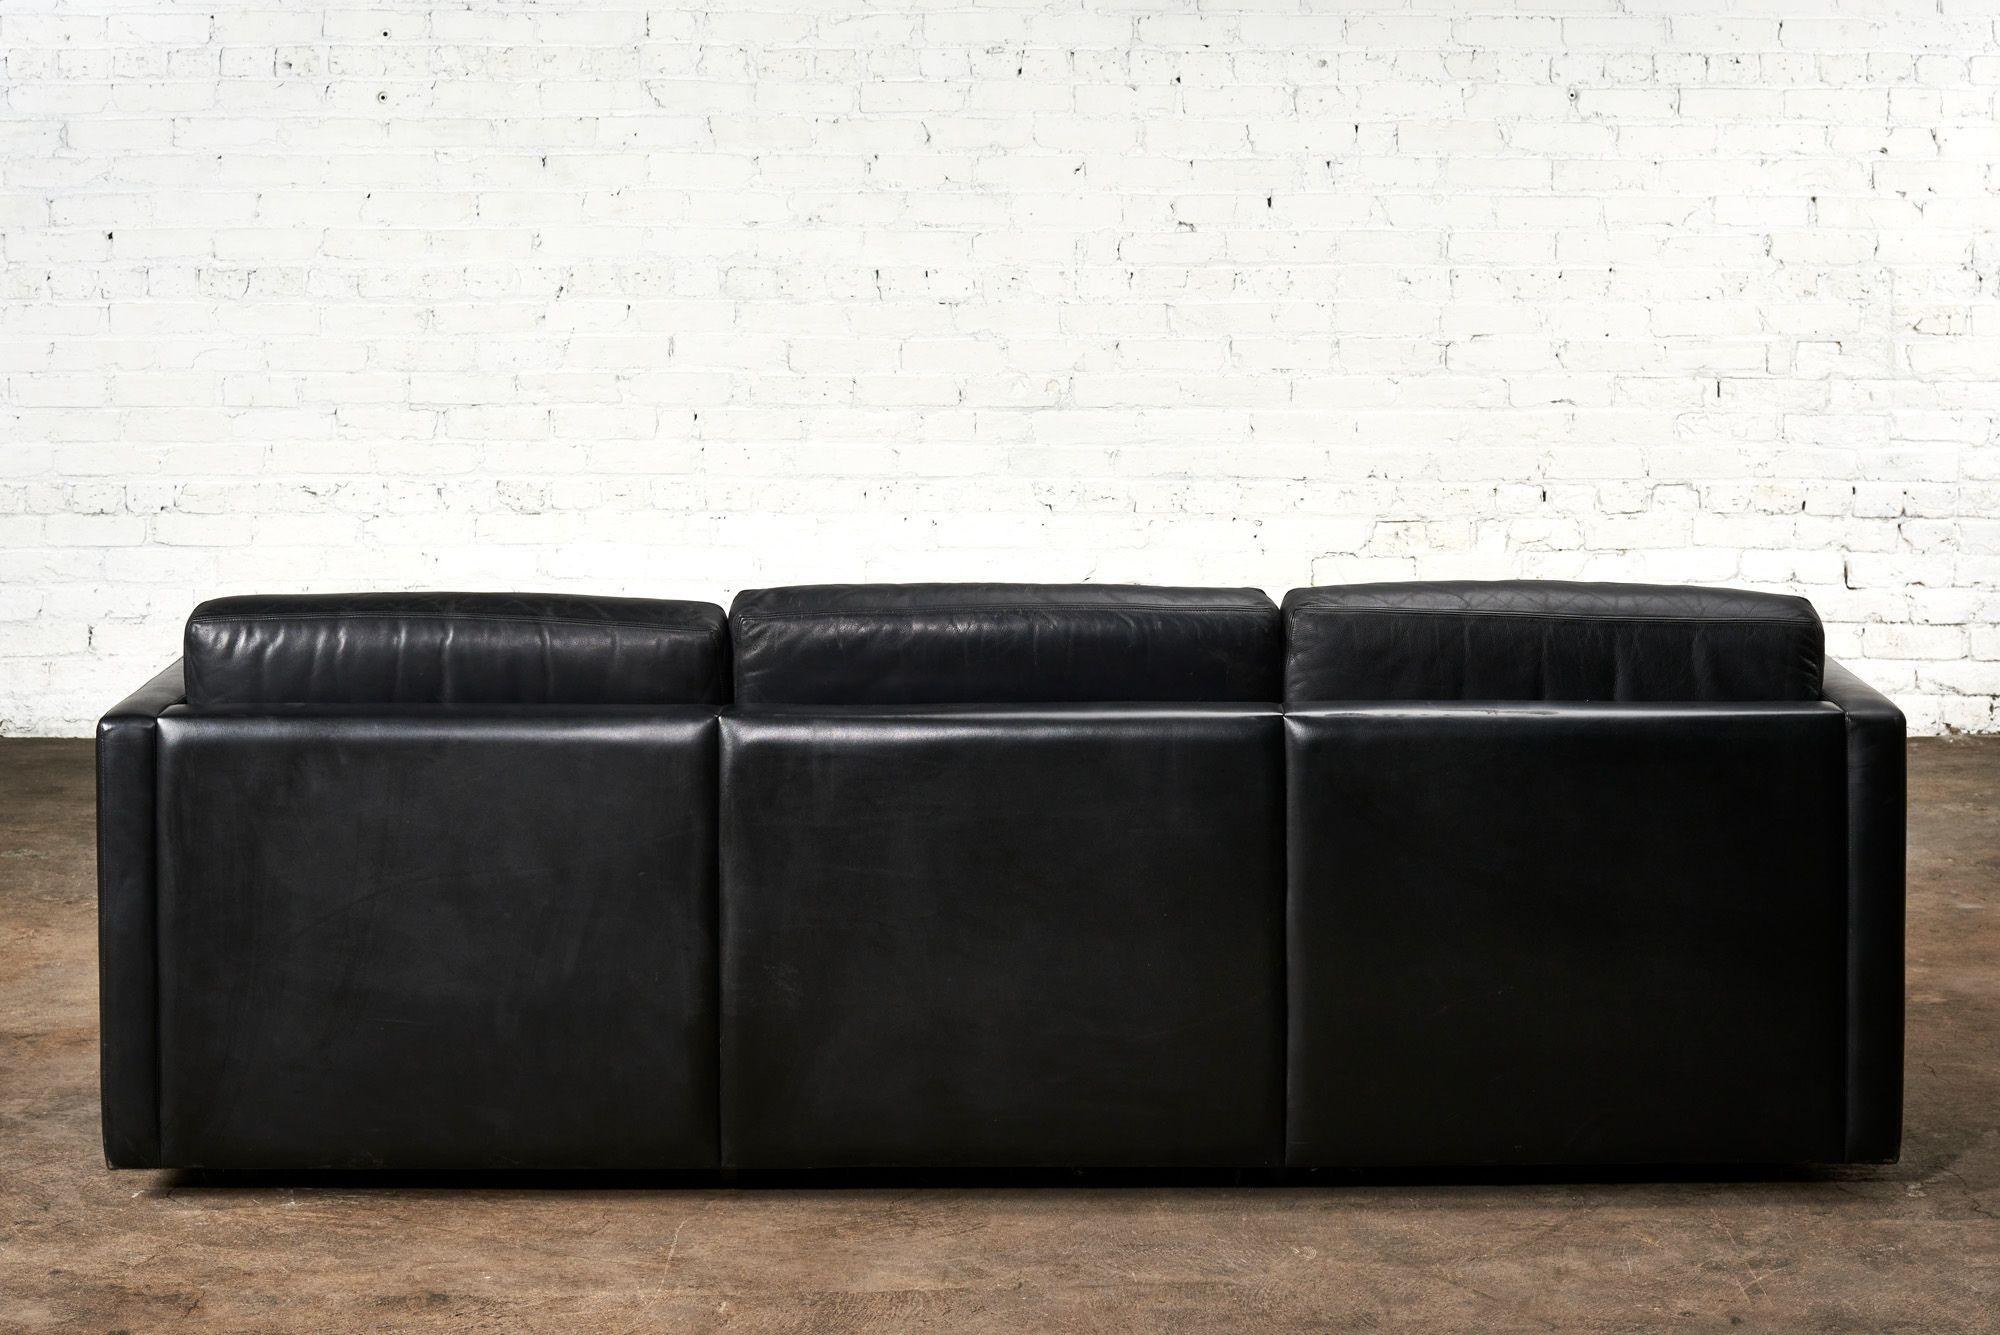 American Knoll Pfister Black Leather Sofa, 1971 For Sale